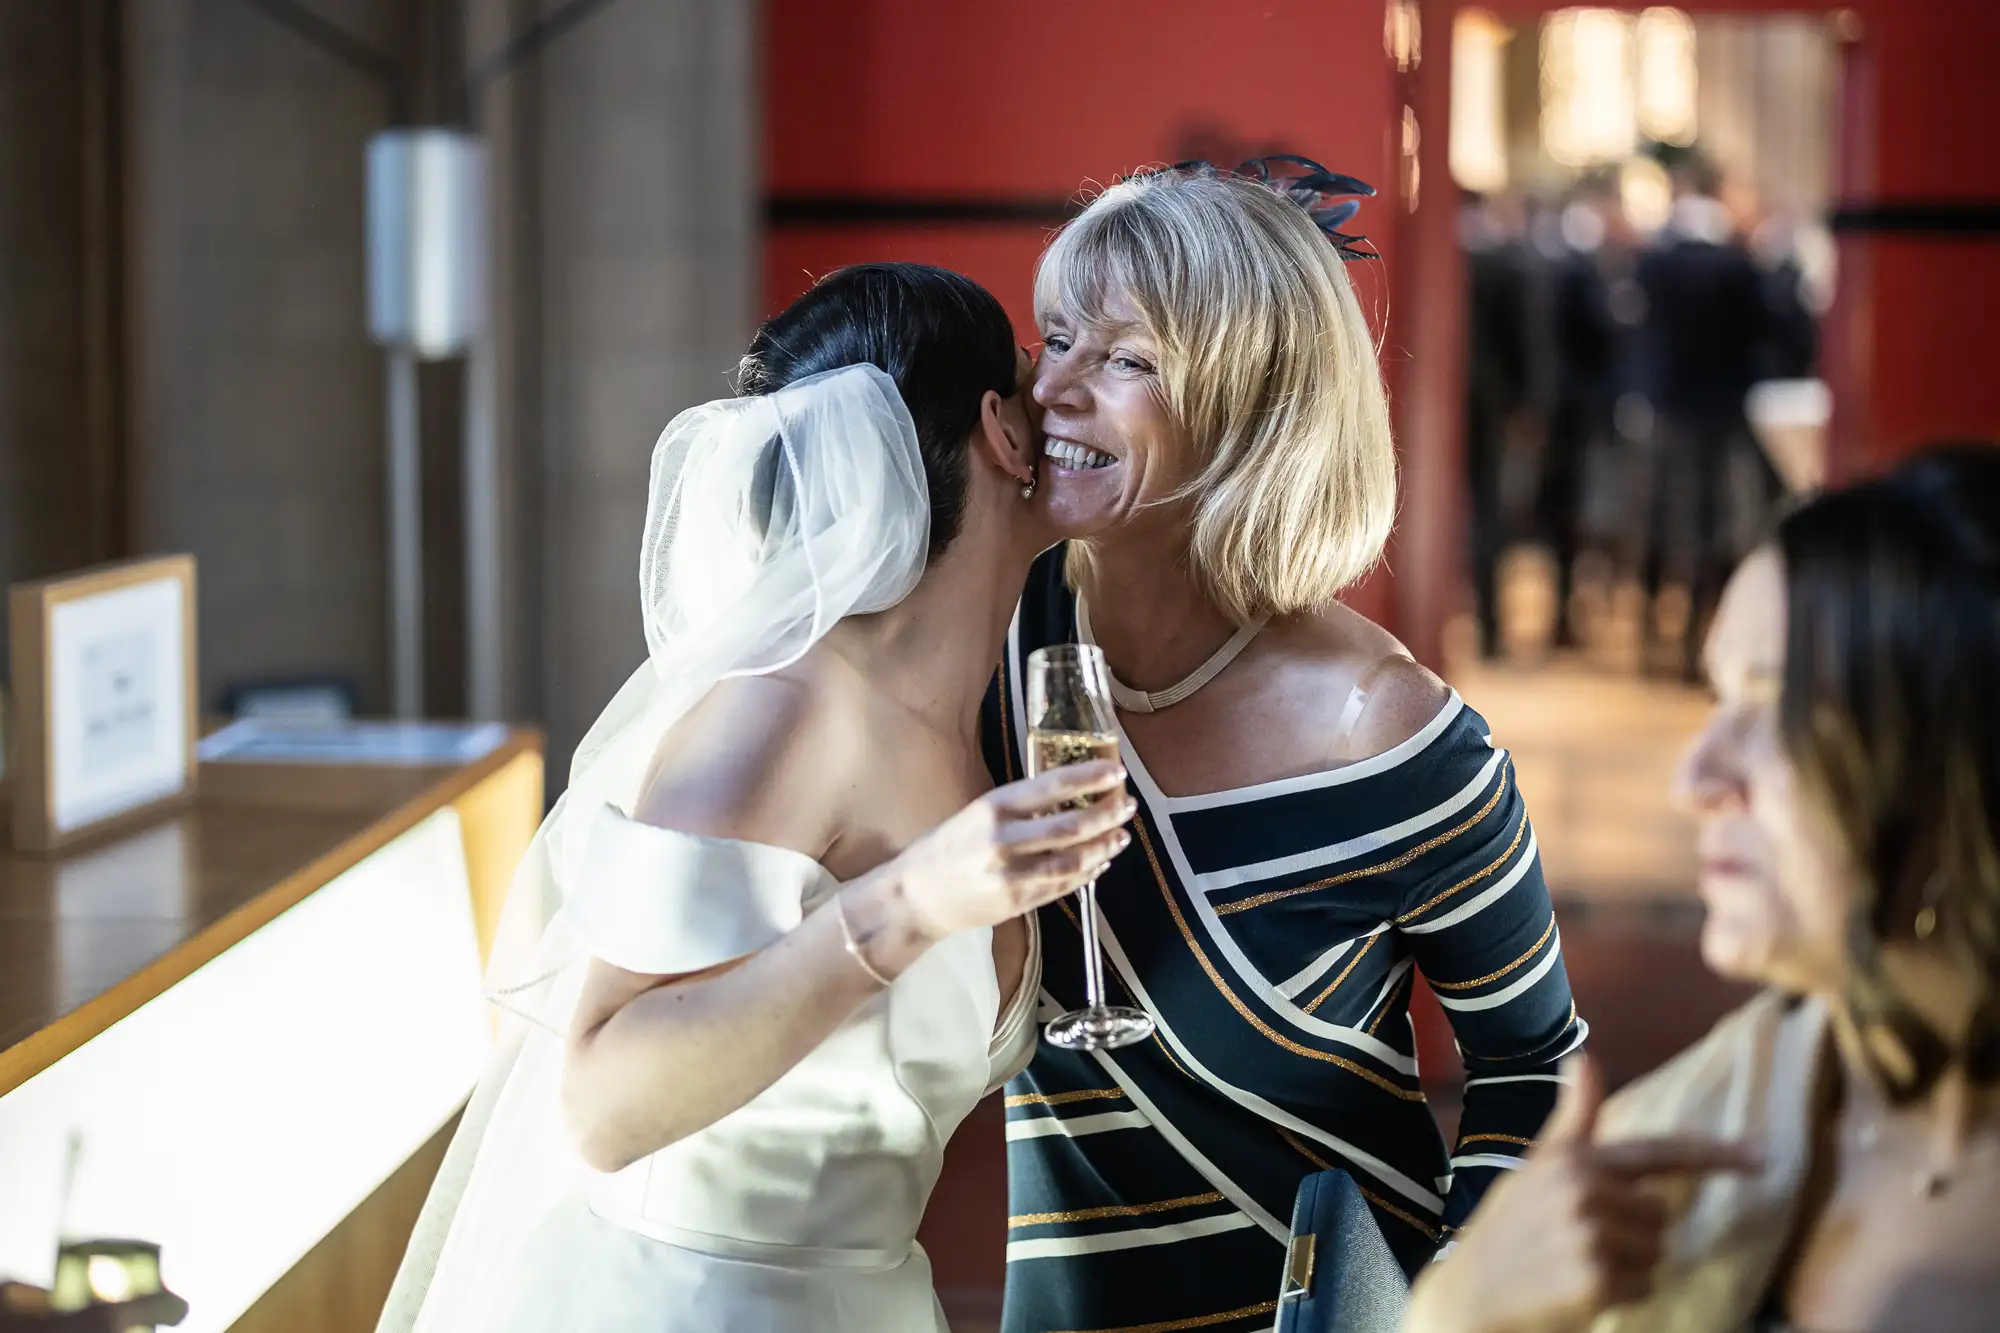 A bride in a white off-shoulder dress embraces an older woman holding a champagne glass at a wedding reception.